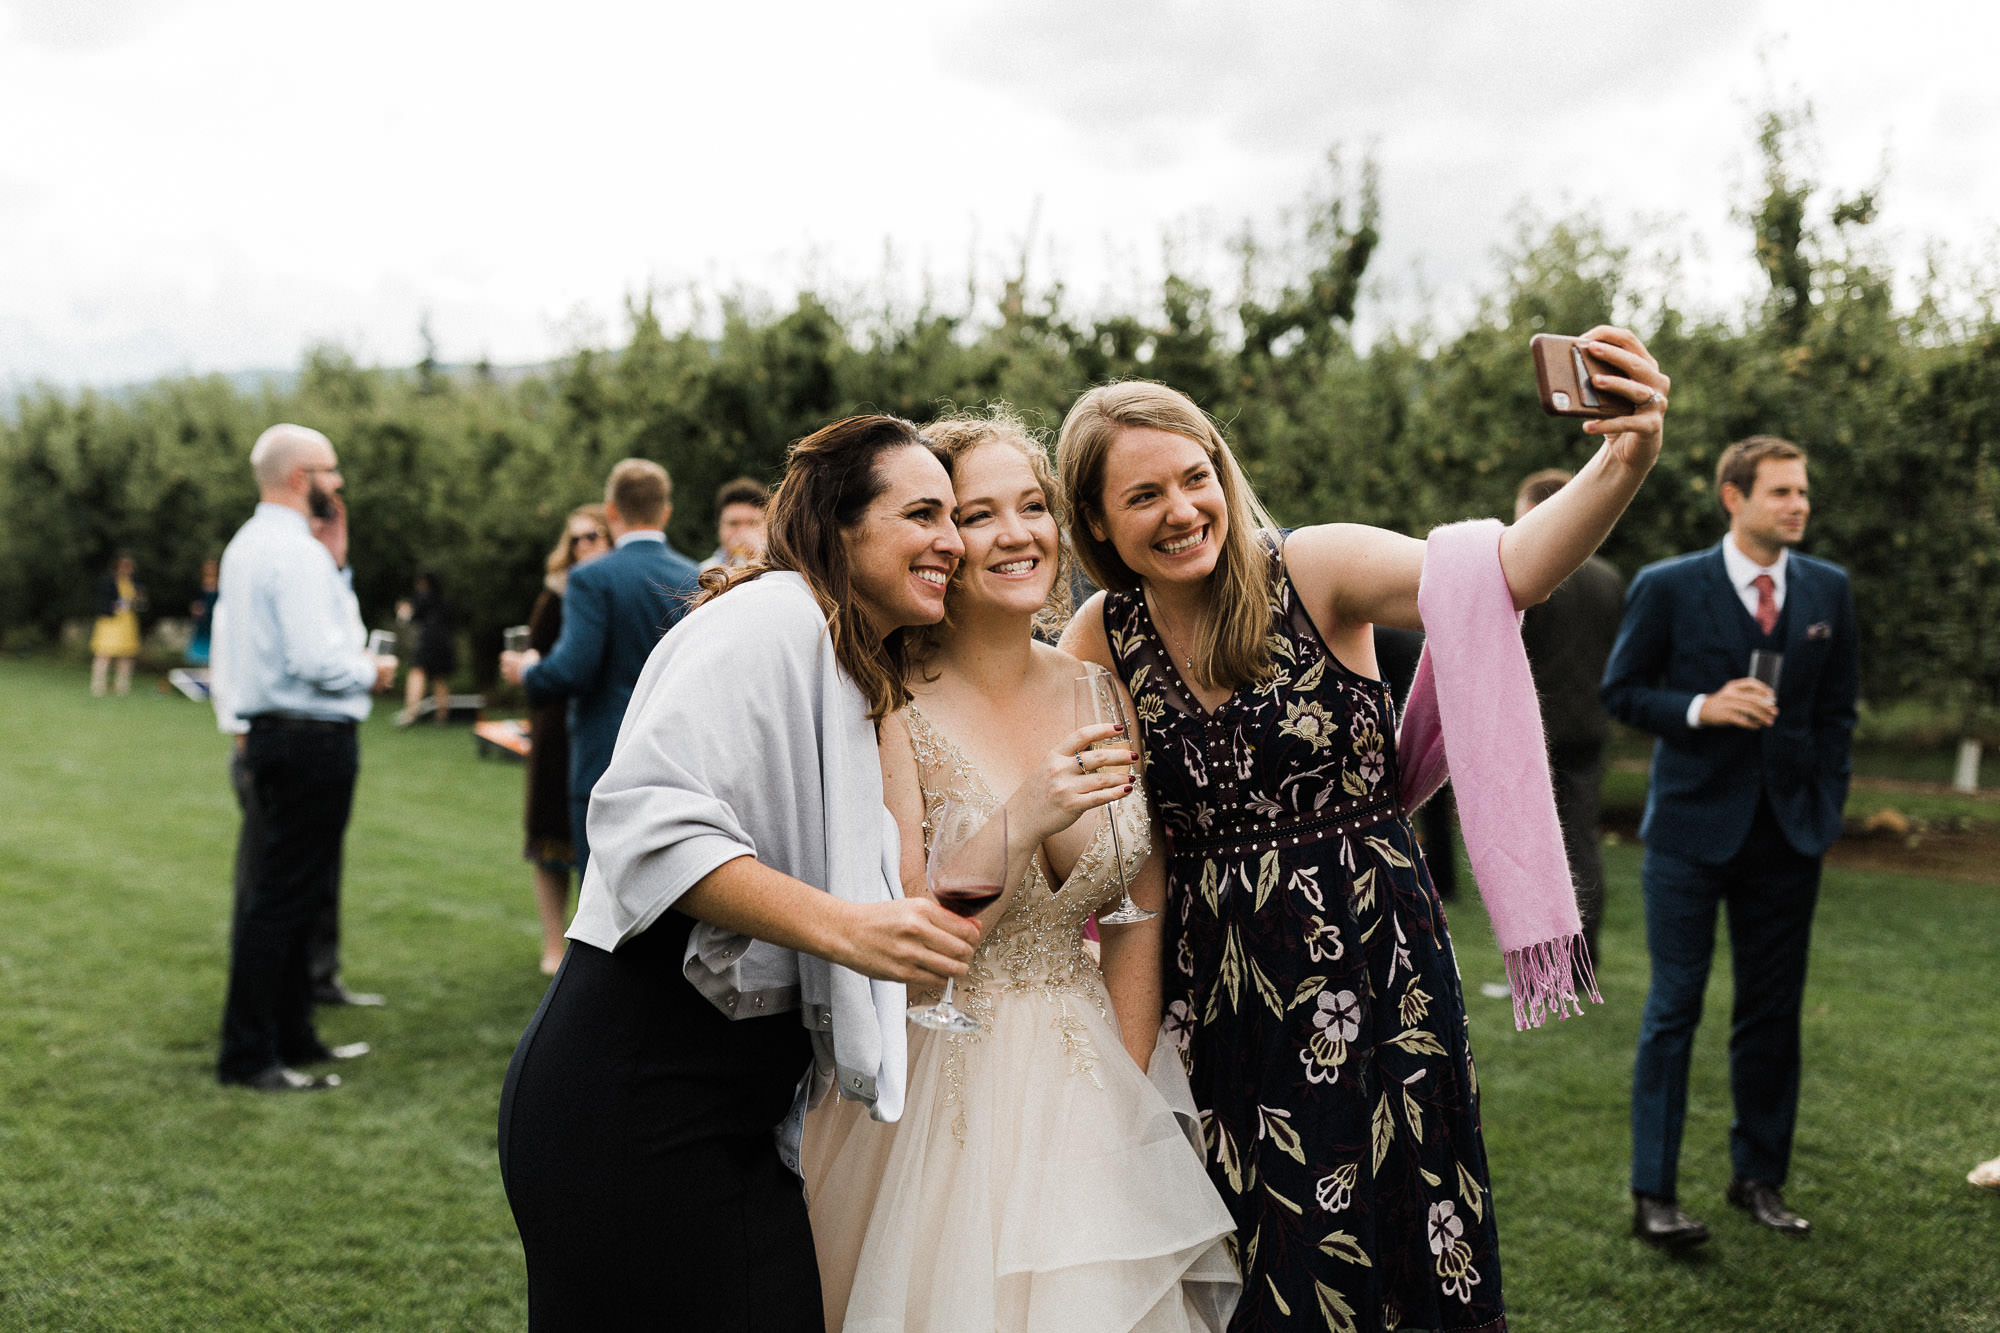 The bride takes selfies with guests at Mt. View Orchards.